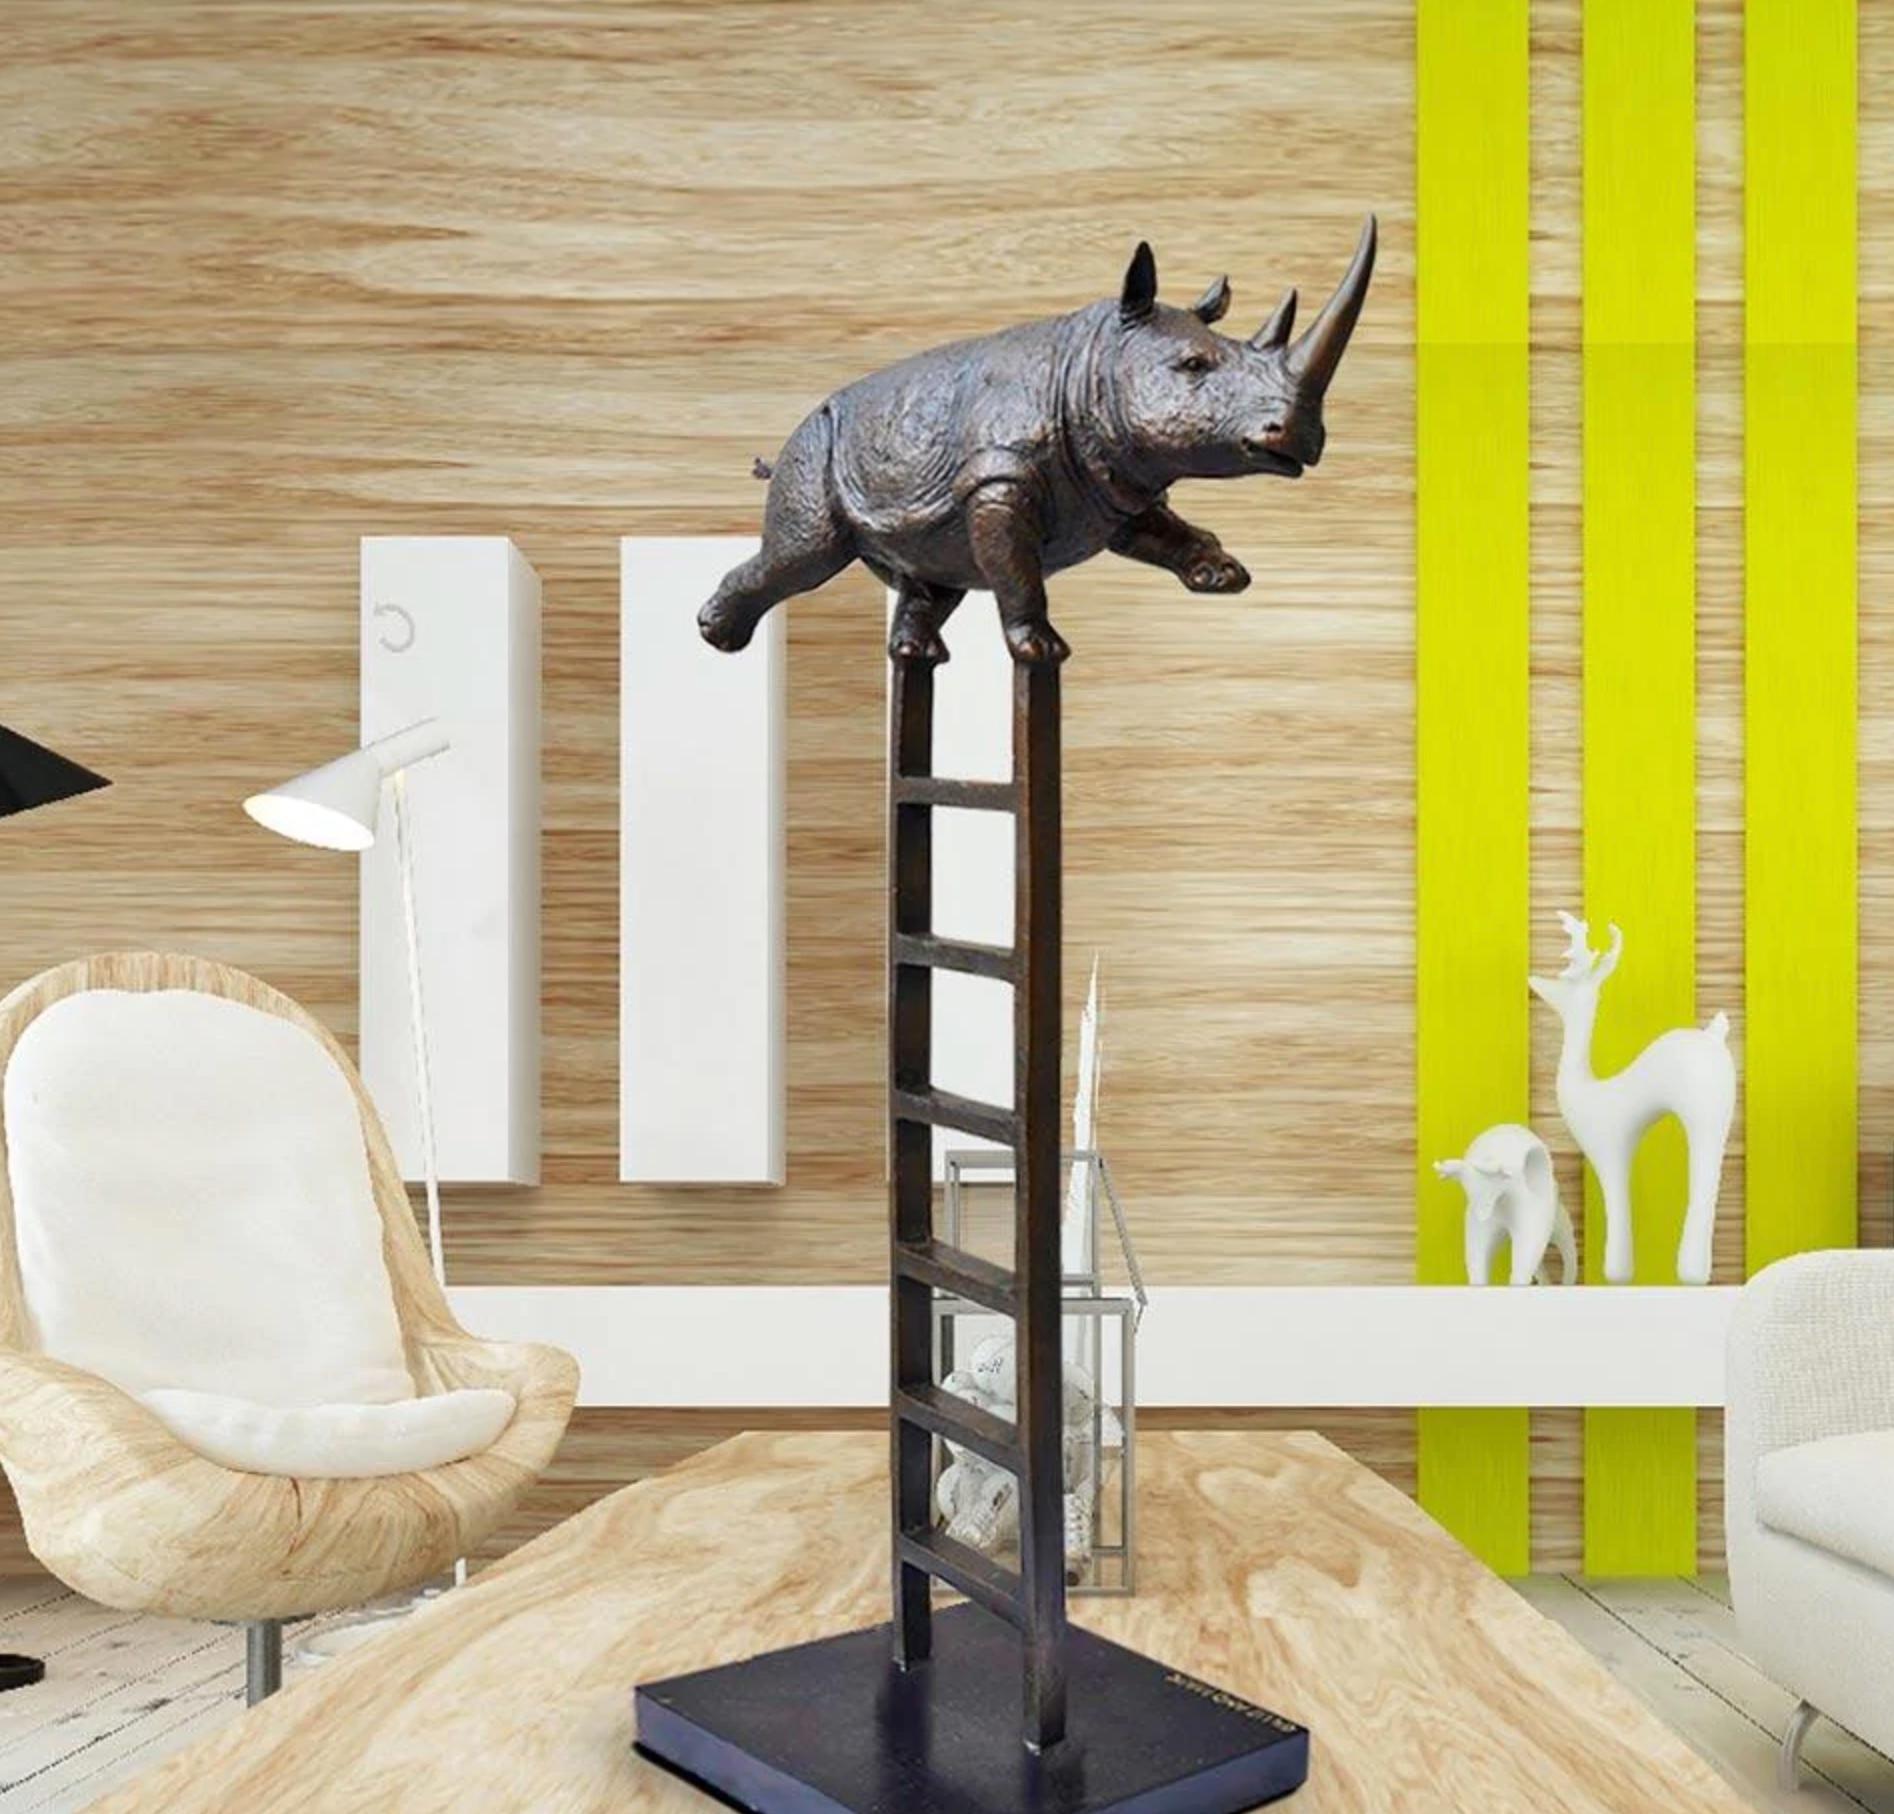 Gillie and Marc Schattner Figurative Sculpture - Authentic Bronze Rhino reaches new heights Sculpture by Gillie and Marc